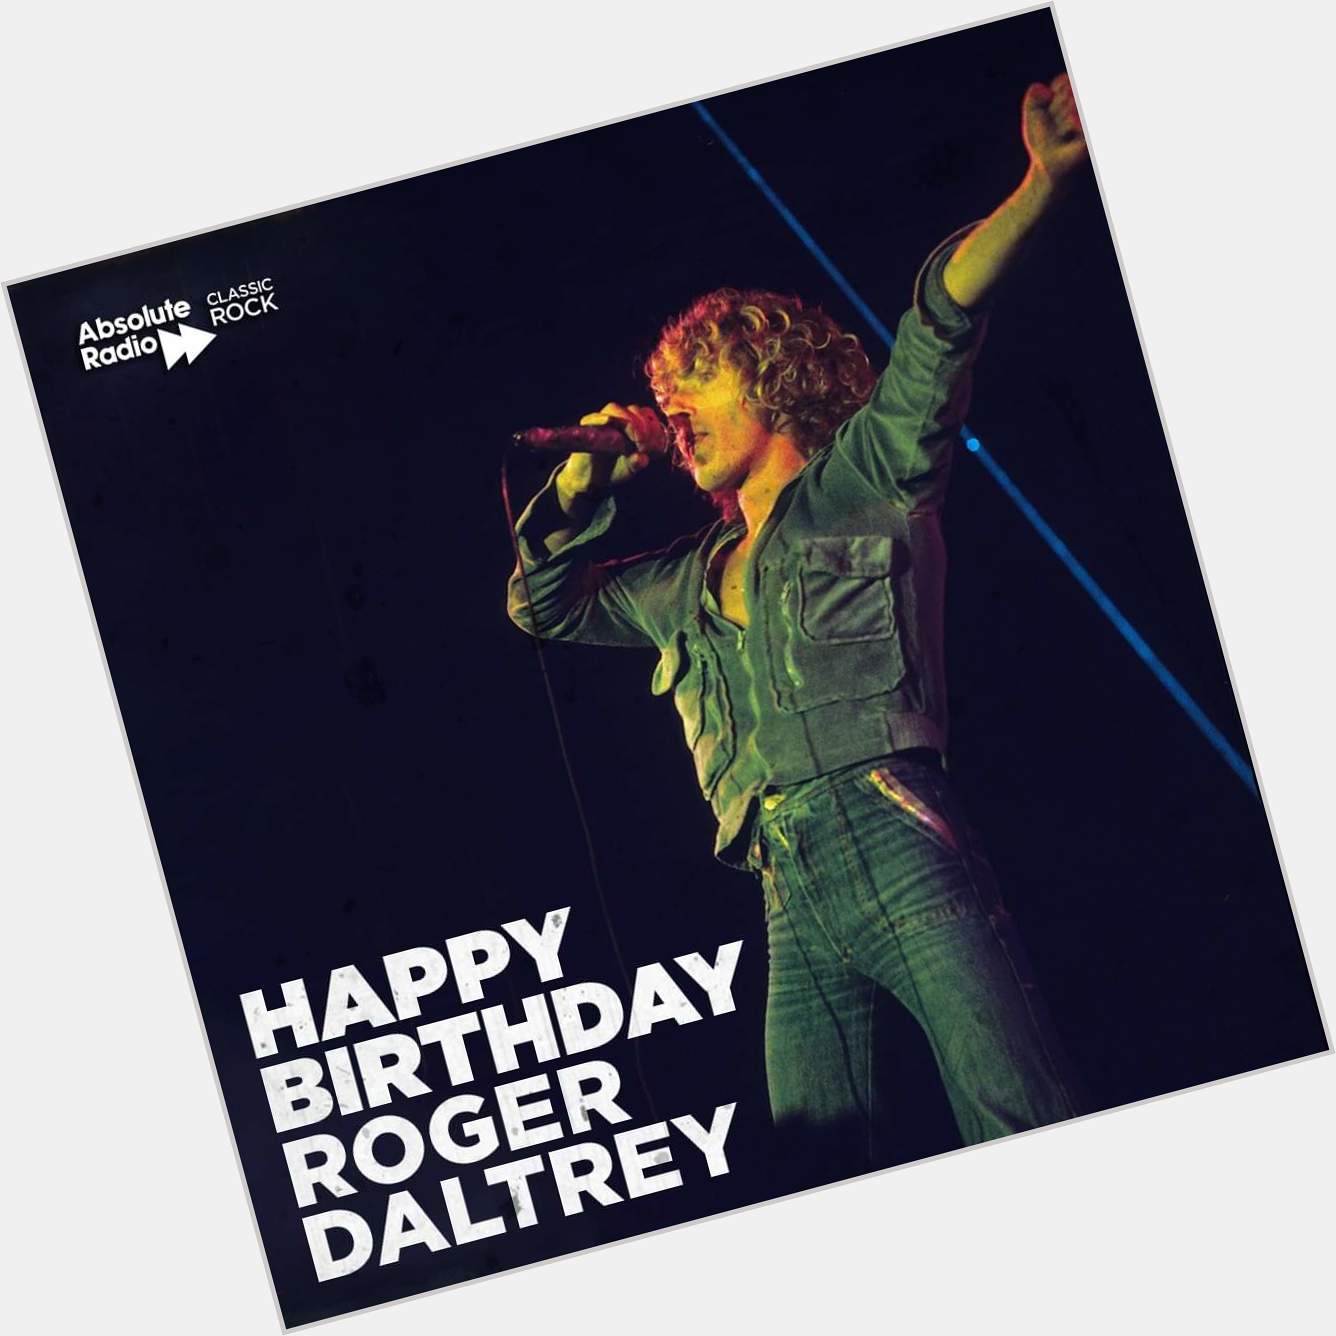 Meet the new boss, same as the old boss!
Happy birthday Roger Daltrey! The Who frontman turns 76 today! 